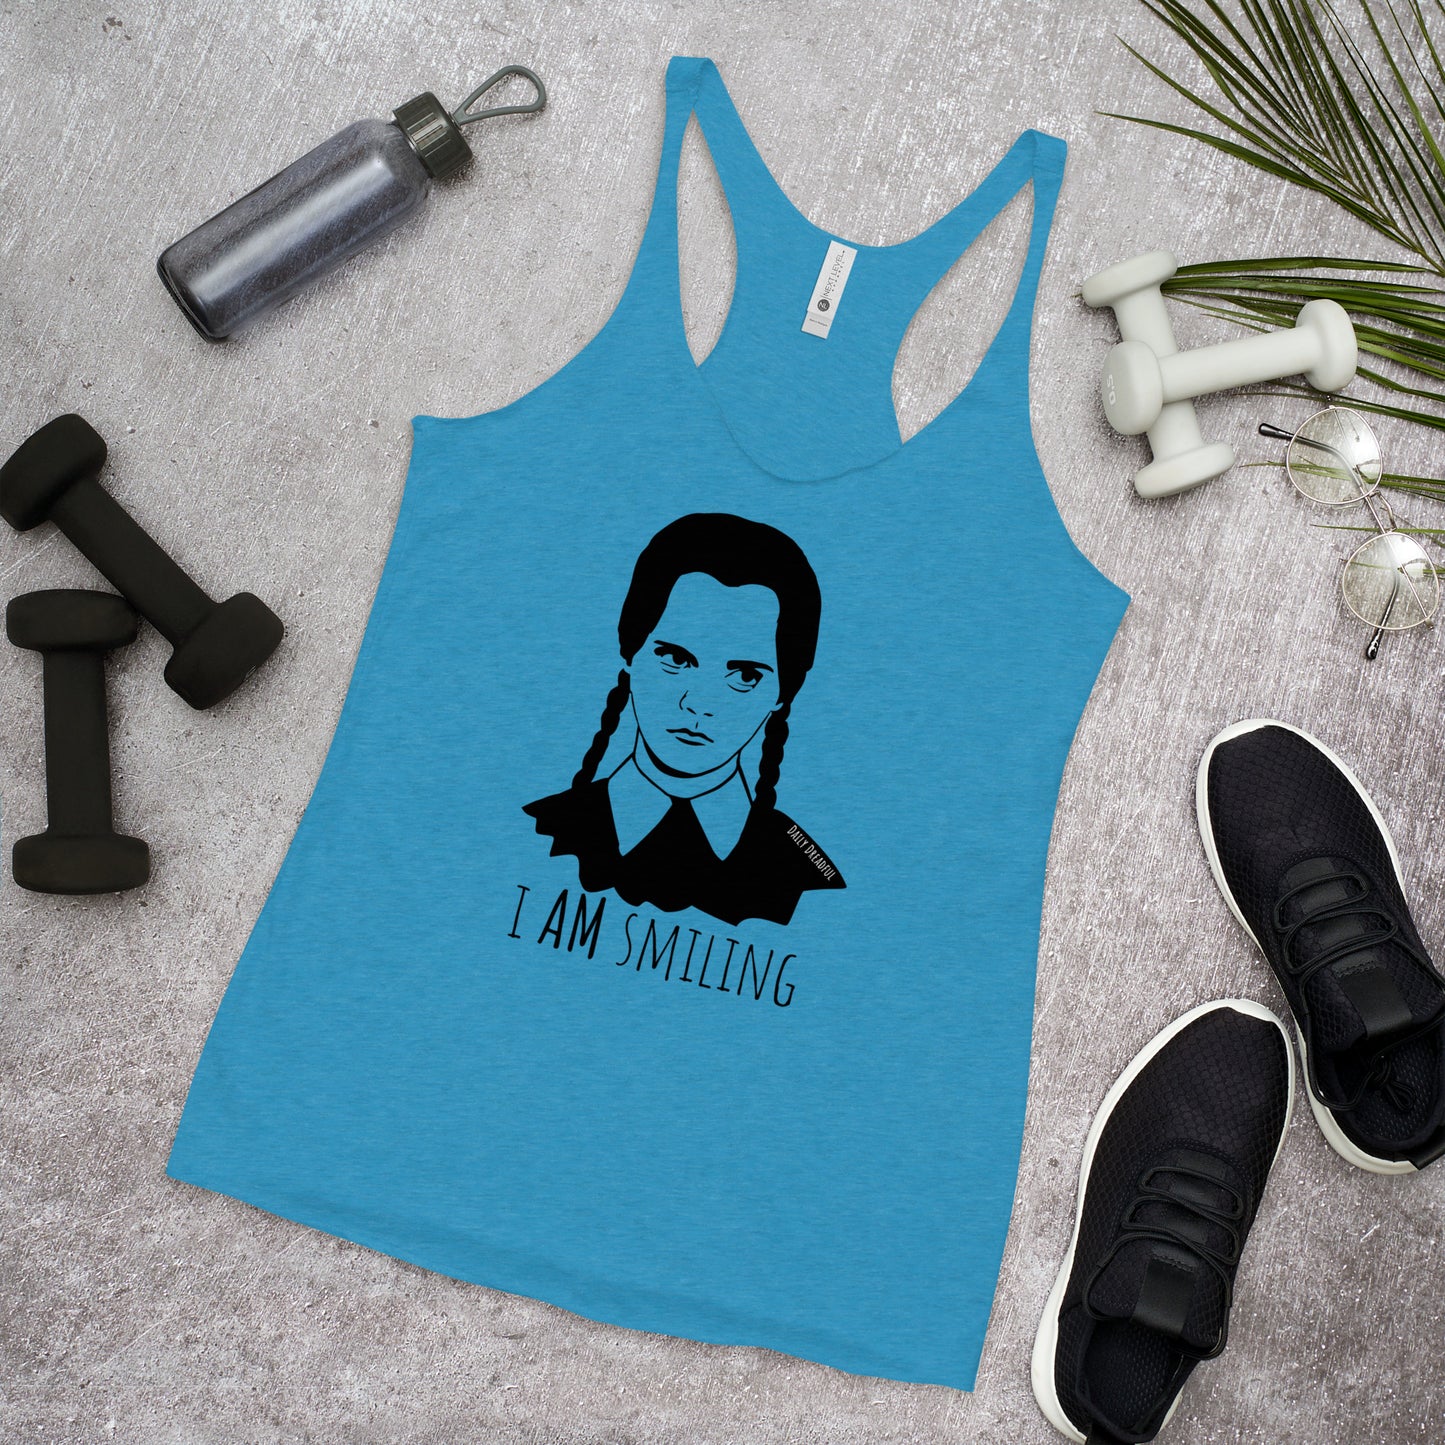 vintage turquoise "I Am Smiling" Wednesday Addams Racerback Tank Top from Daily Dreadful